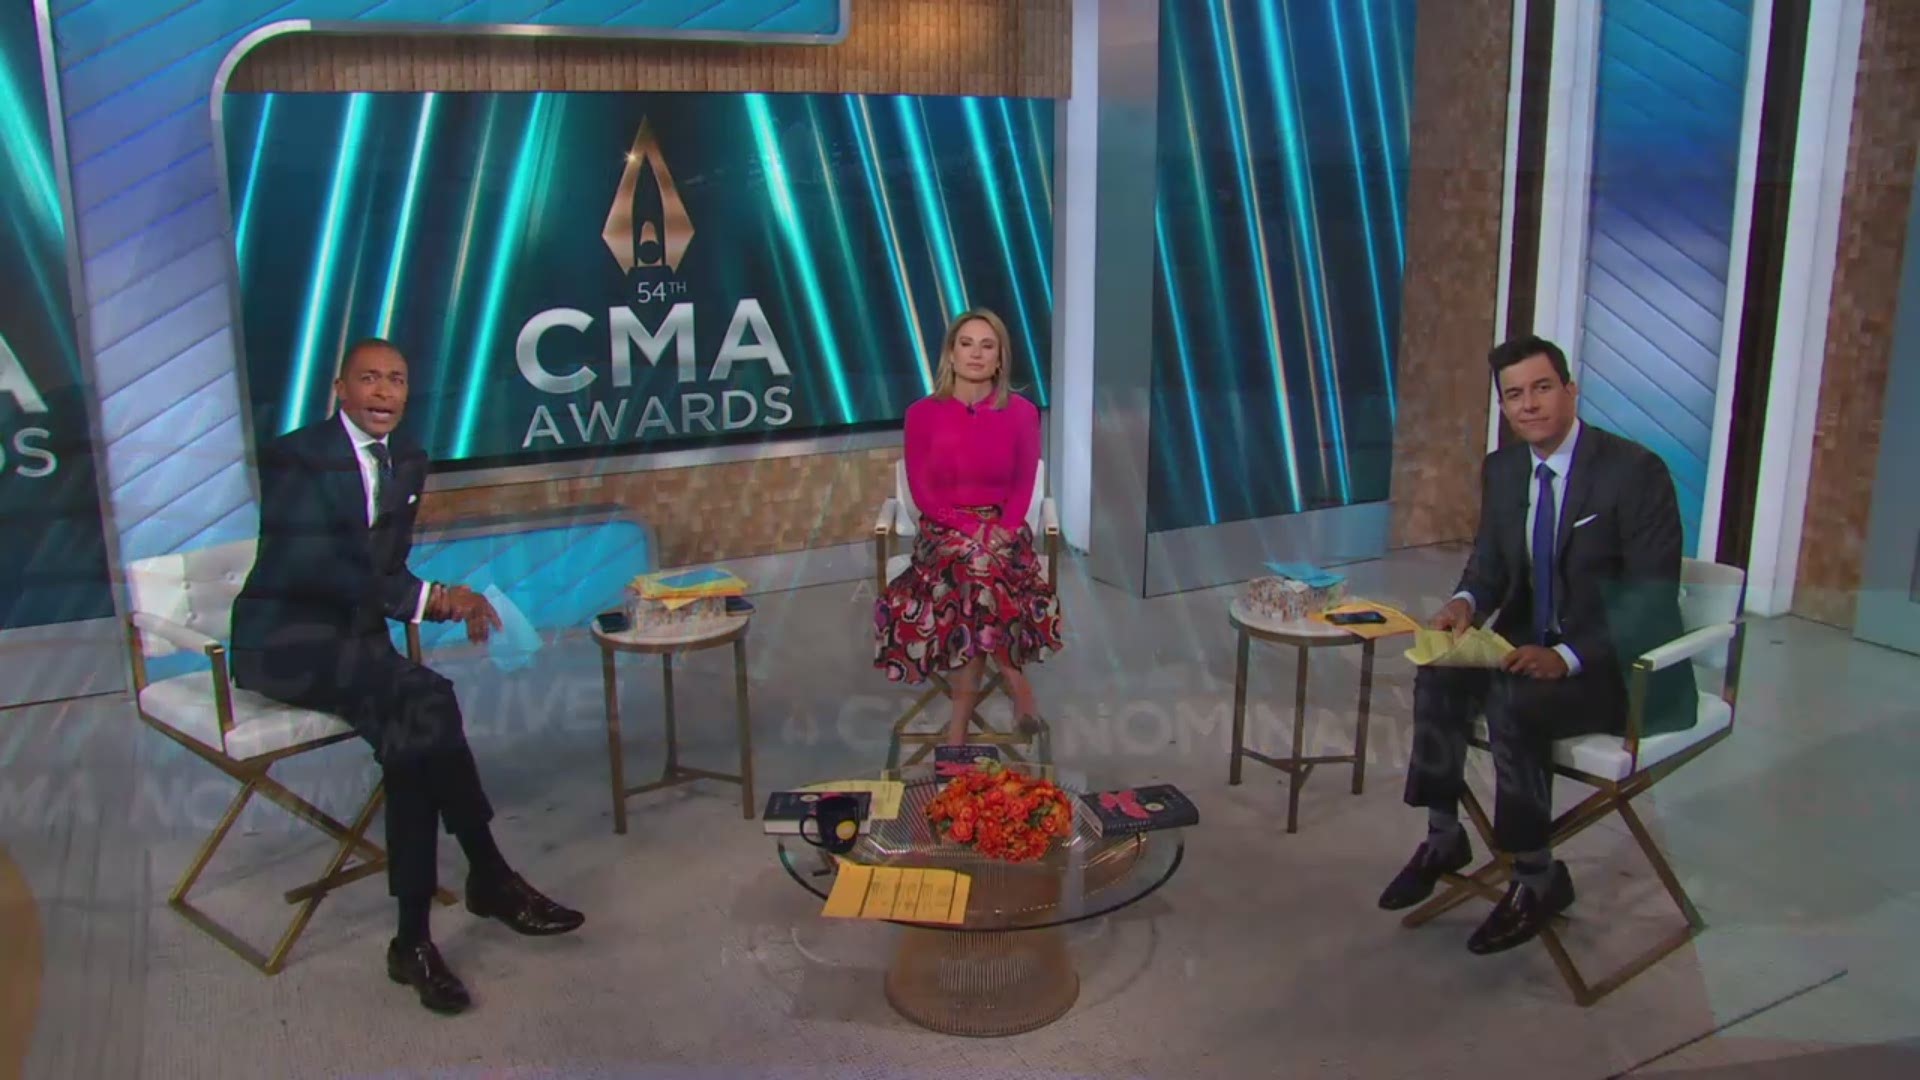 The Country Music Association announced nominees for “The 54th Annual CMA Awards” this morning live on ABC’s “Good Morning America.”